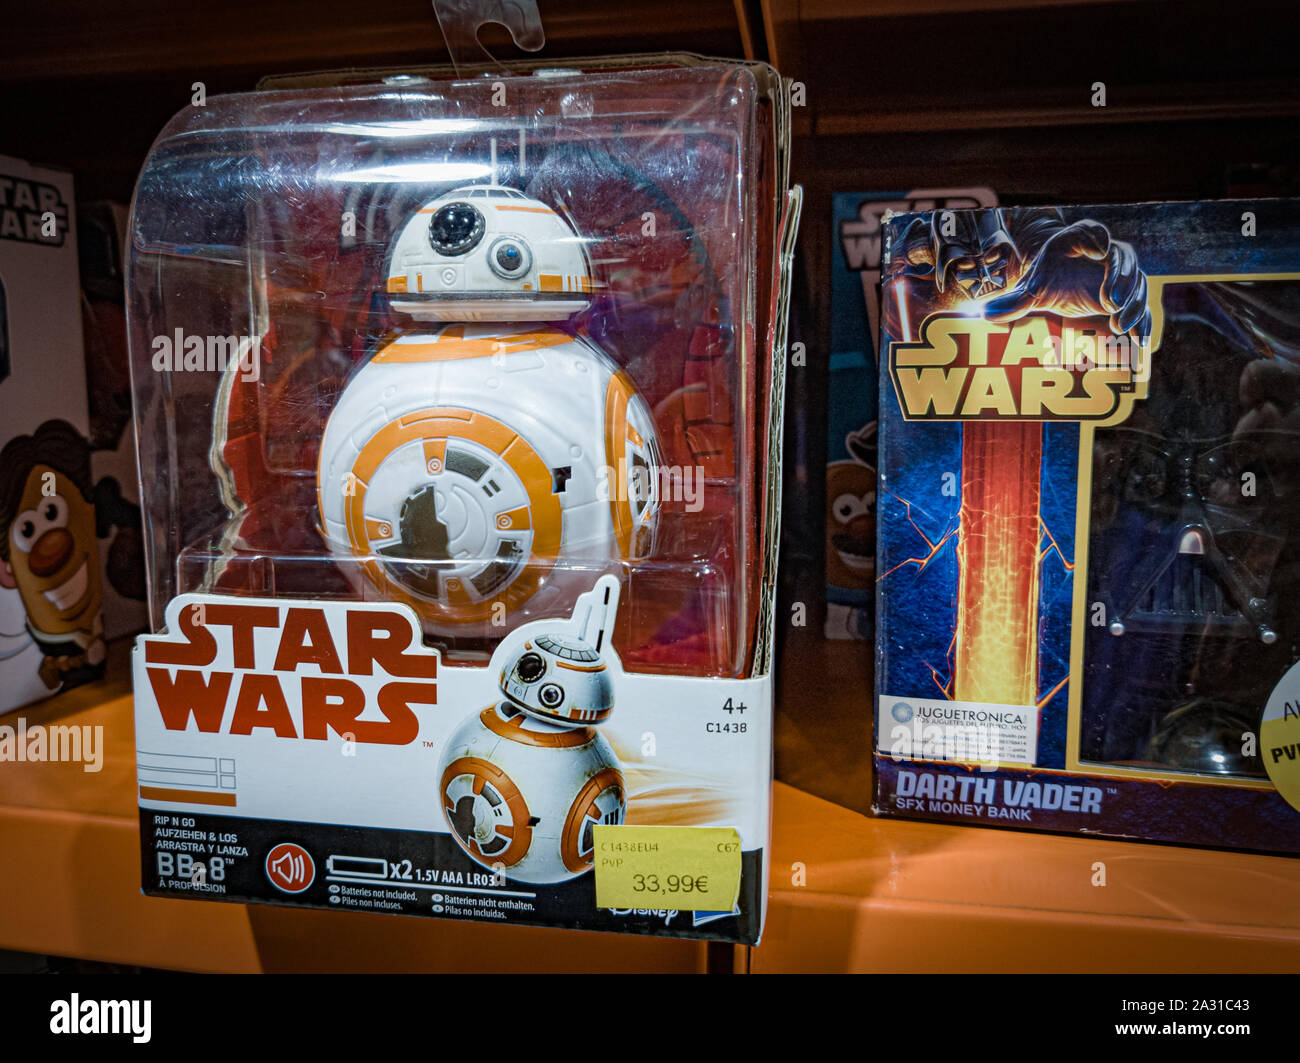 Barcelona, Spain. October 2019: Star Wars BB-8 figure toy on shelve in shopping mall. Stock Photo